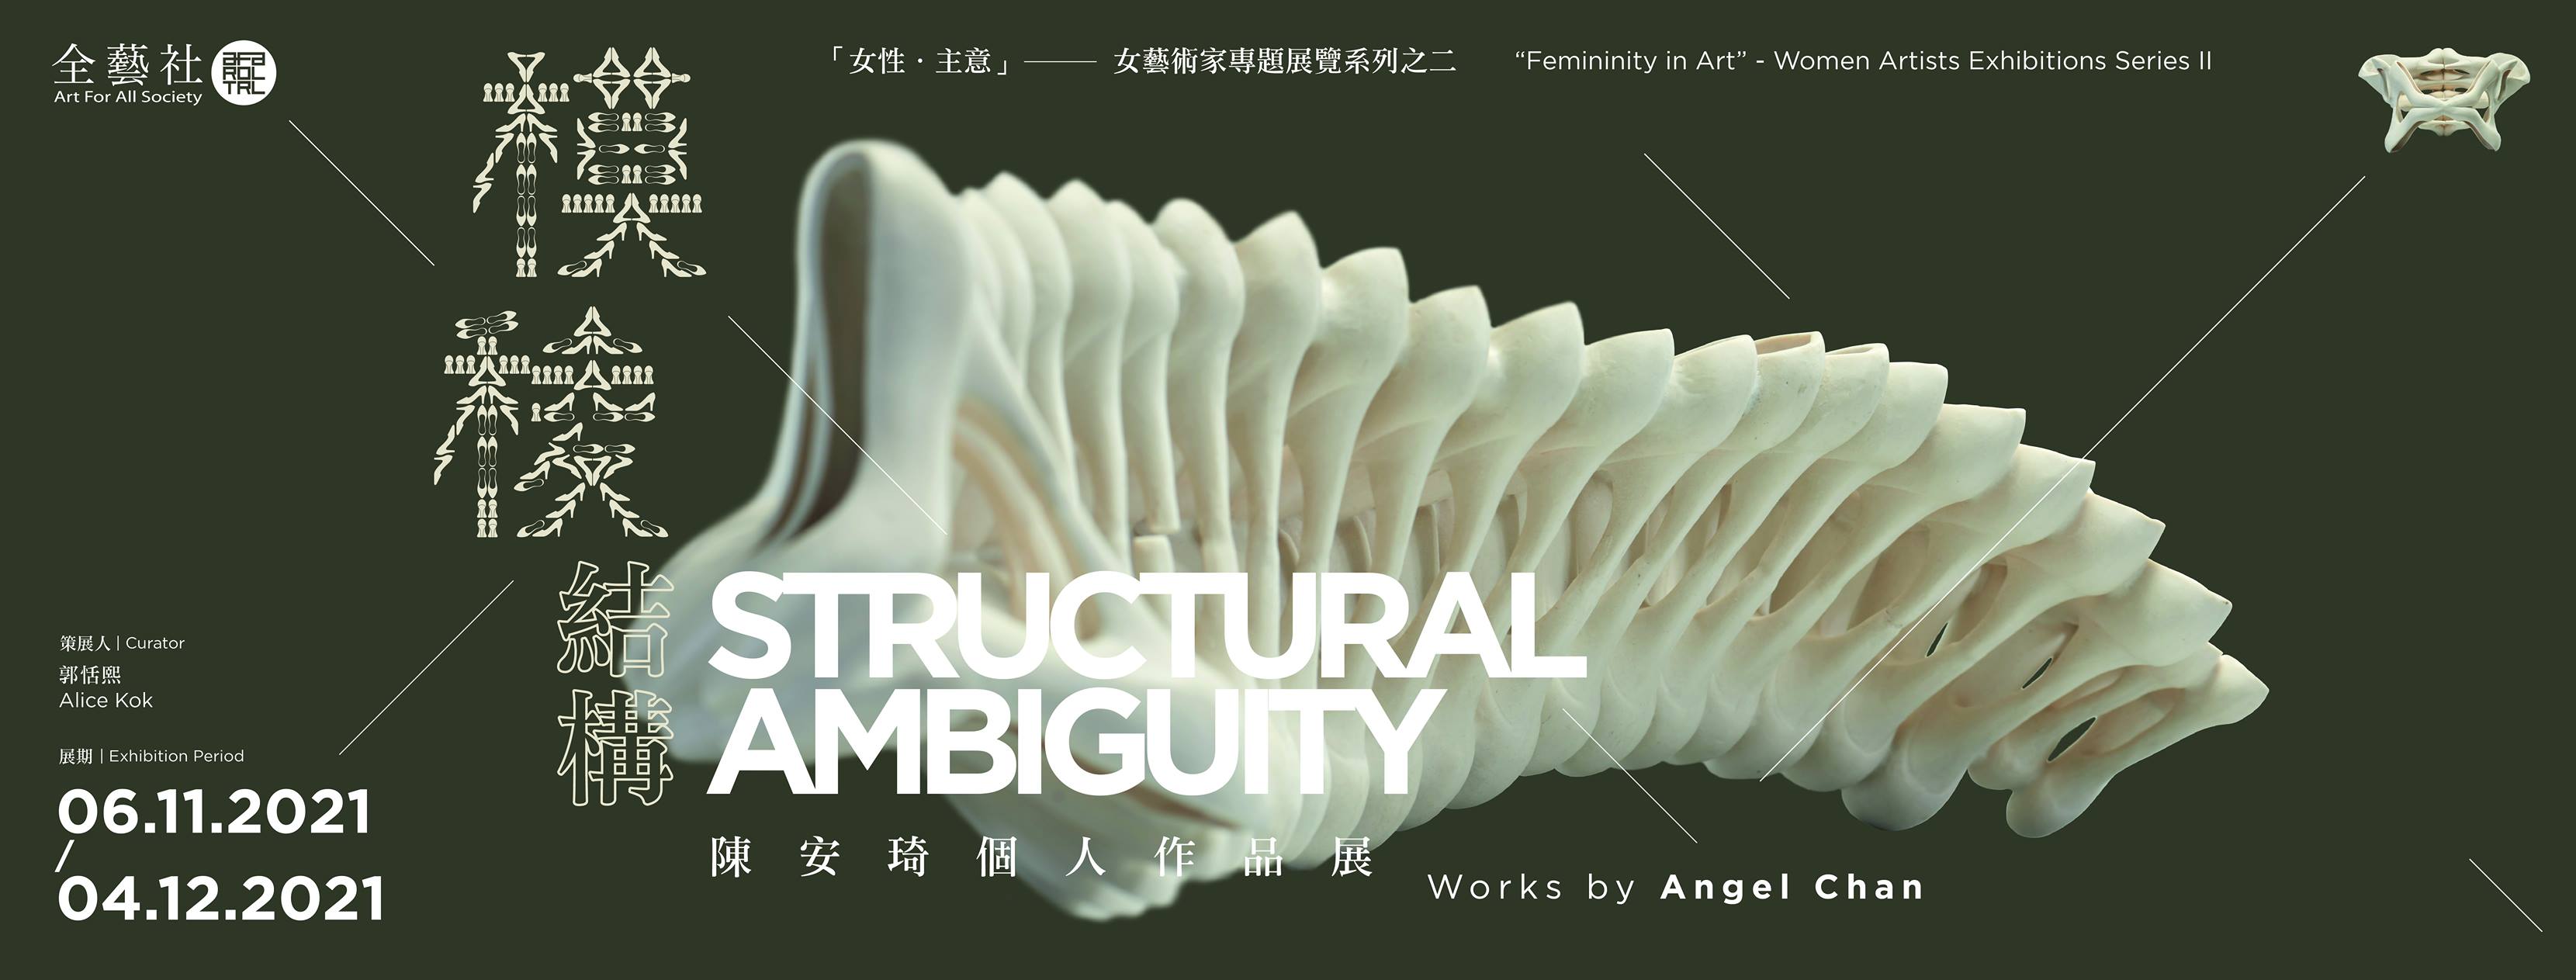 Structural Ambiguity AFA Banner